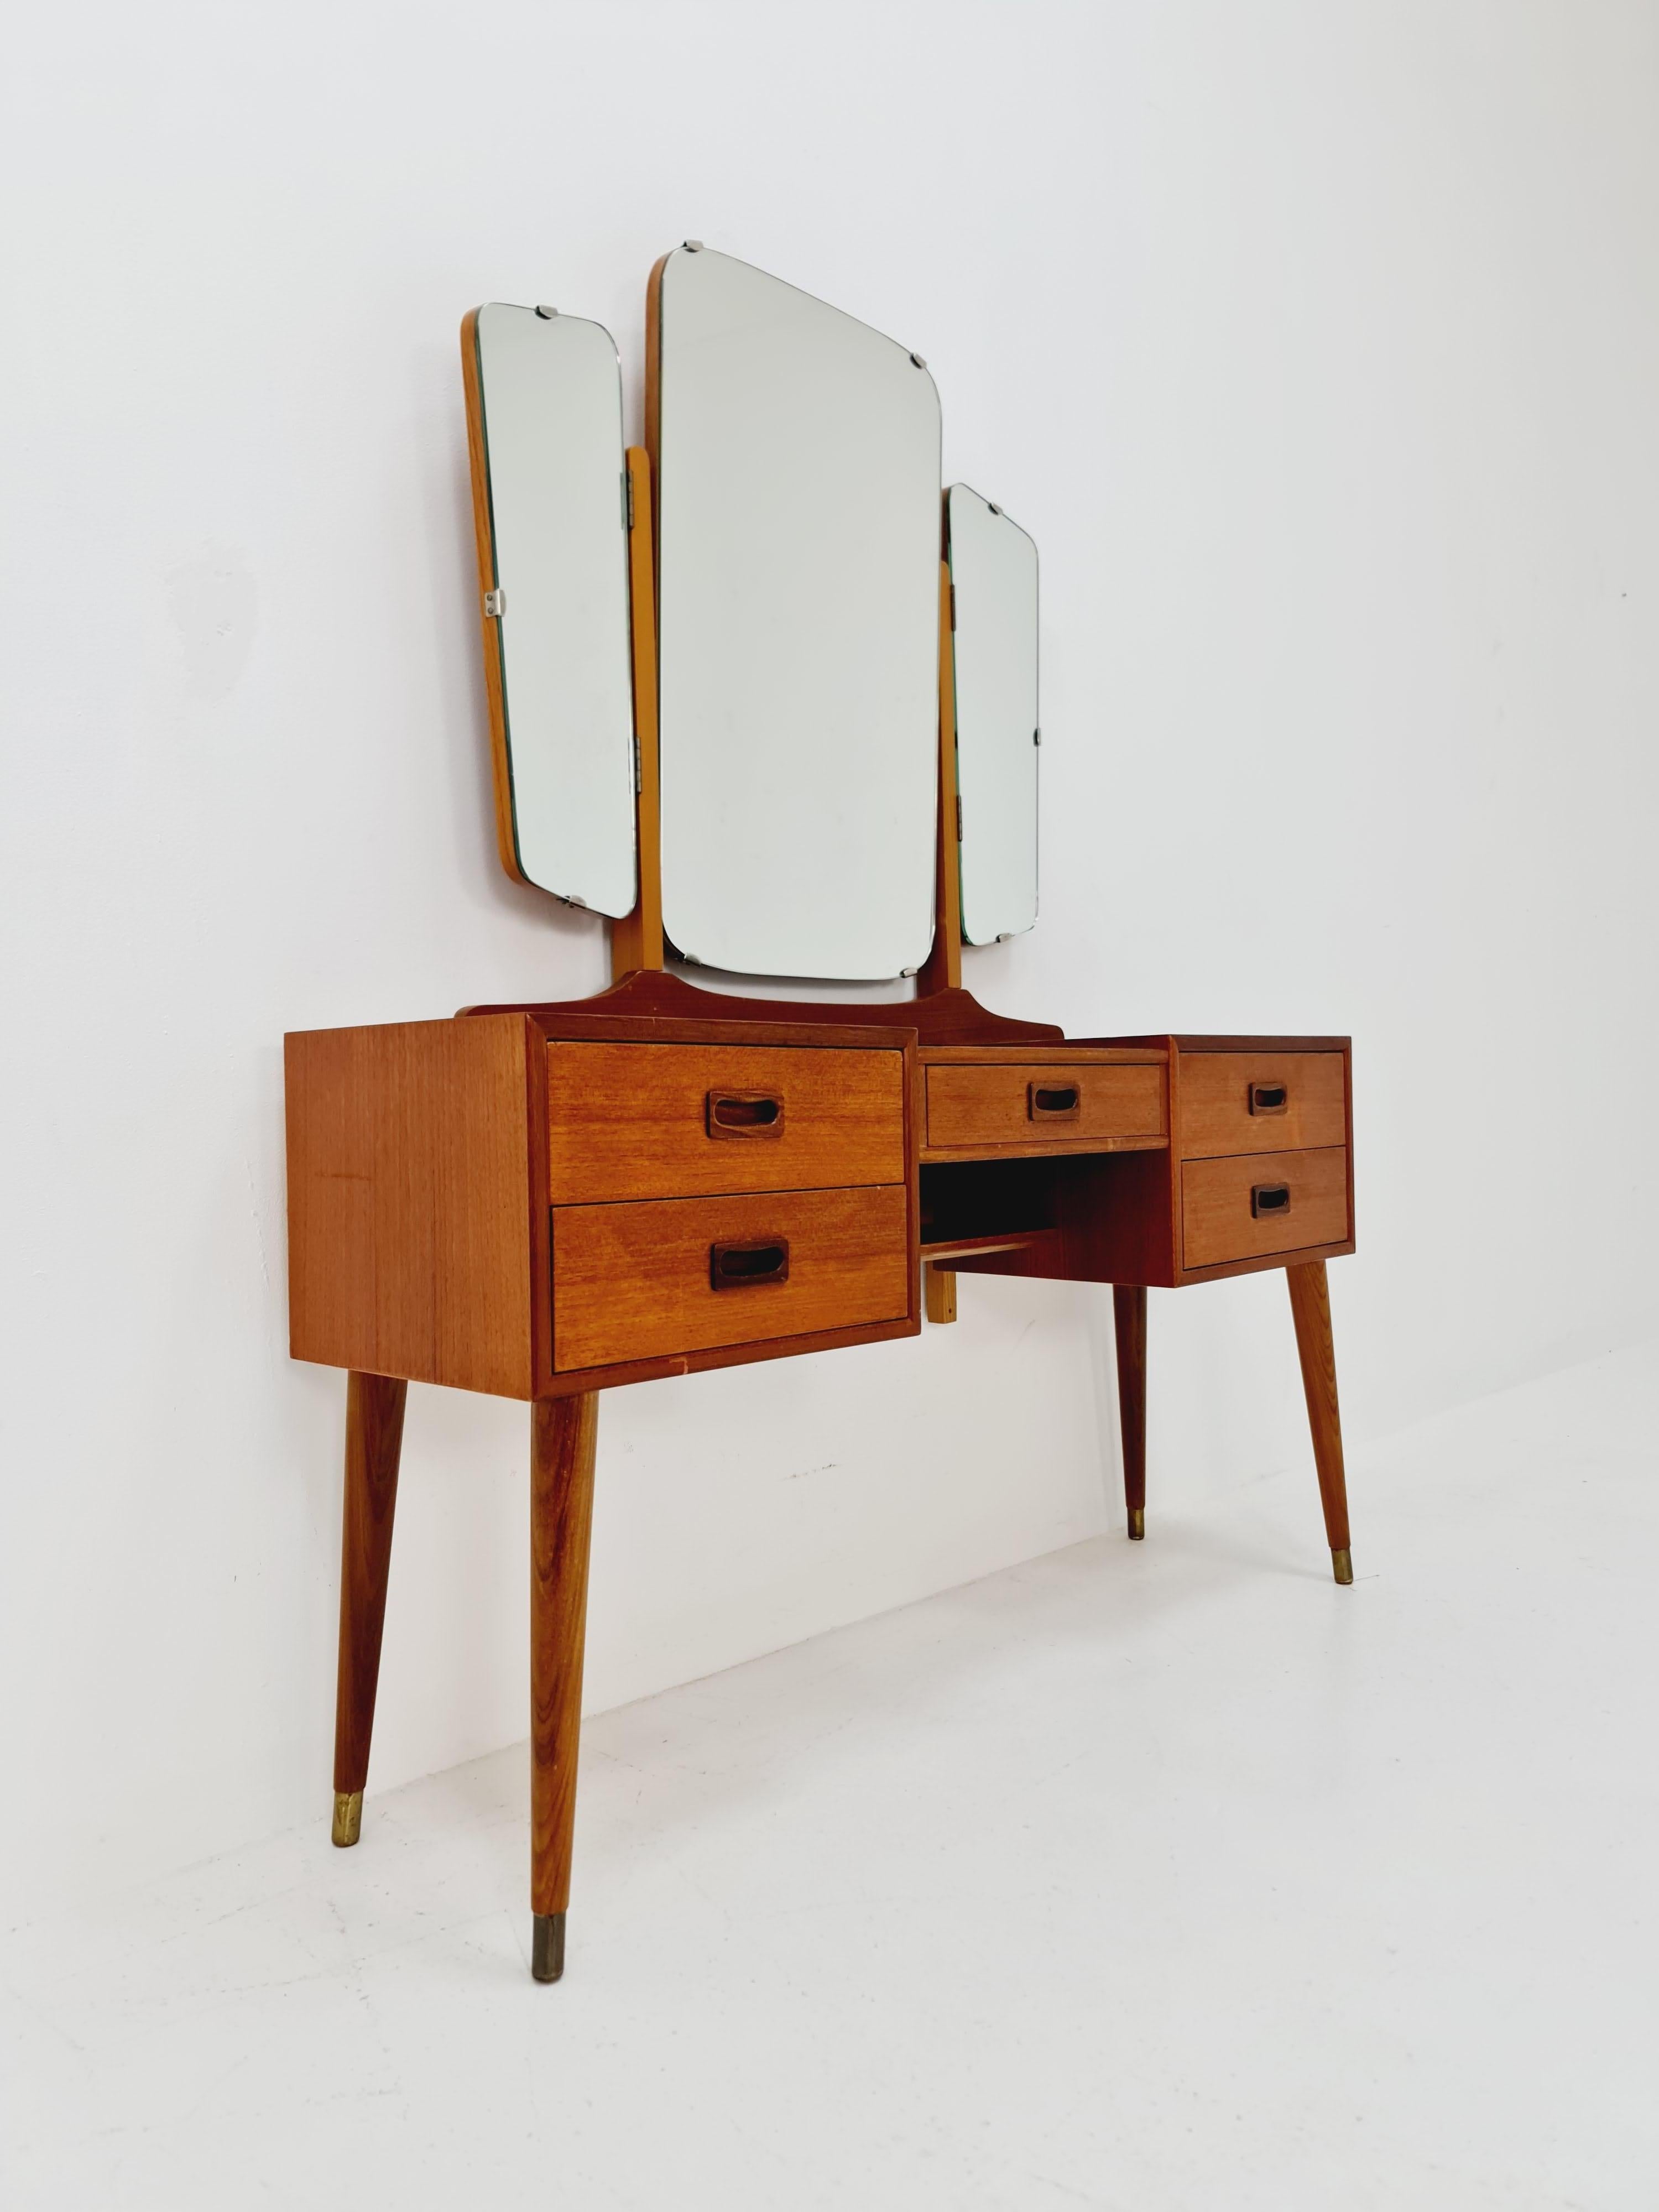 Modern Danish Teak vanity table with stool make up table by Fröseke 1960 In Good Condition For Sale In Gaggenau, DE